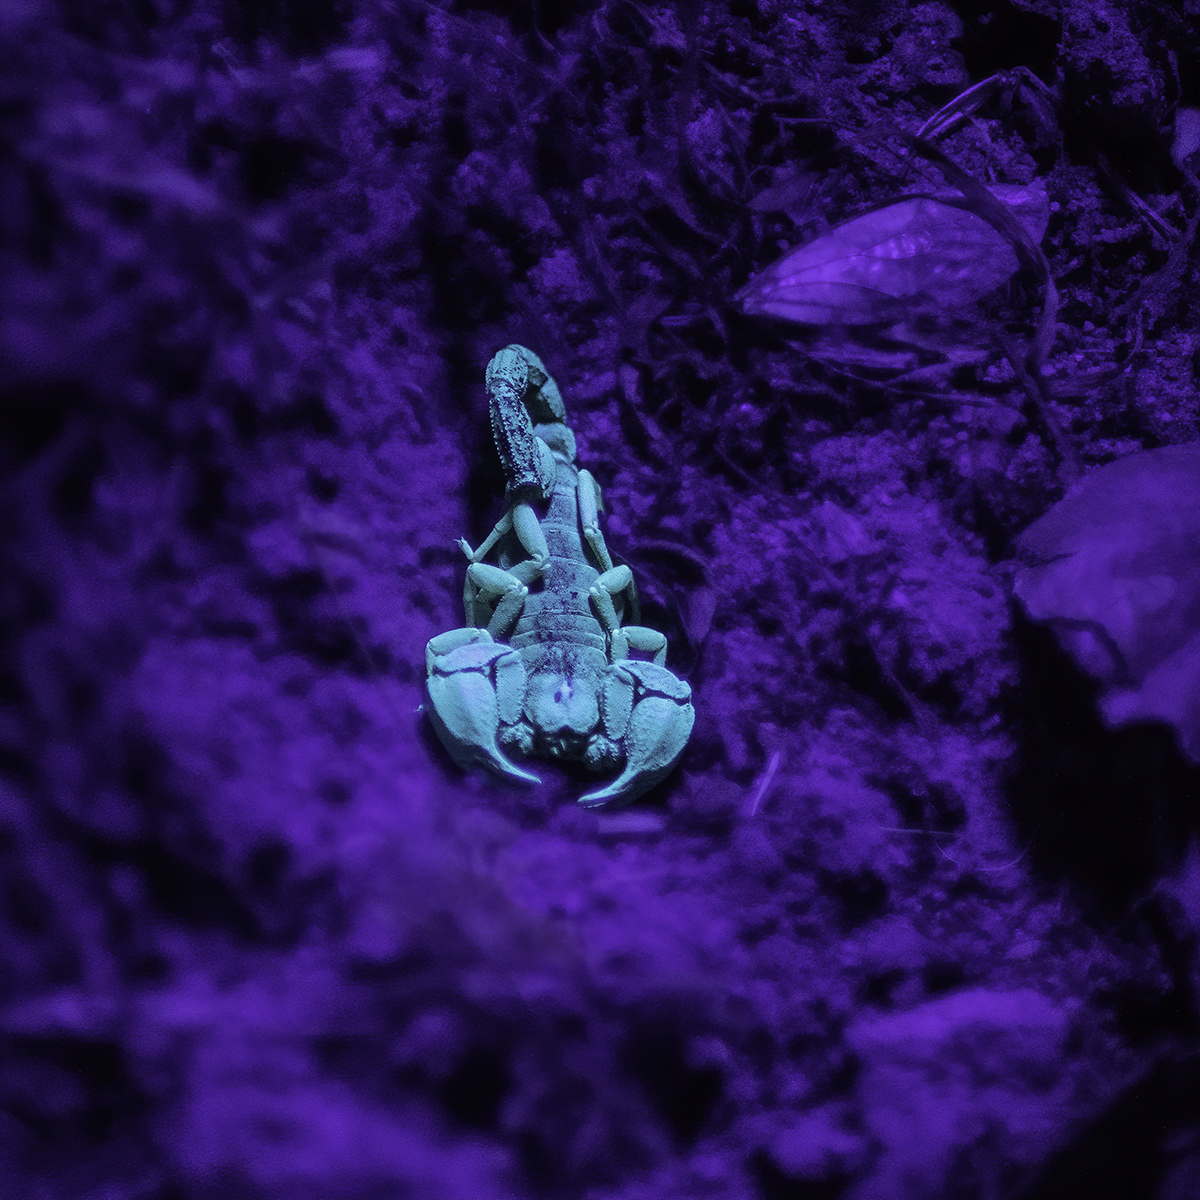 California Forest Scorpion (Uroctonus mordax). They are about 1 to 2 cm long and easiest to find at night because like other scorpions, they fluoresce brightly under UV light